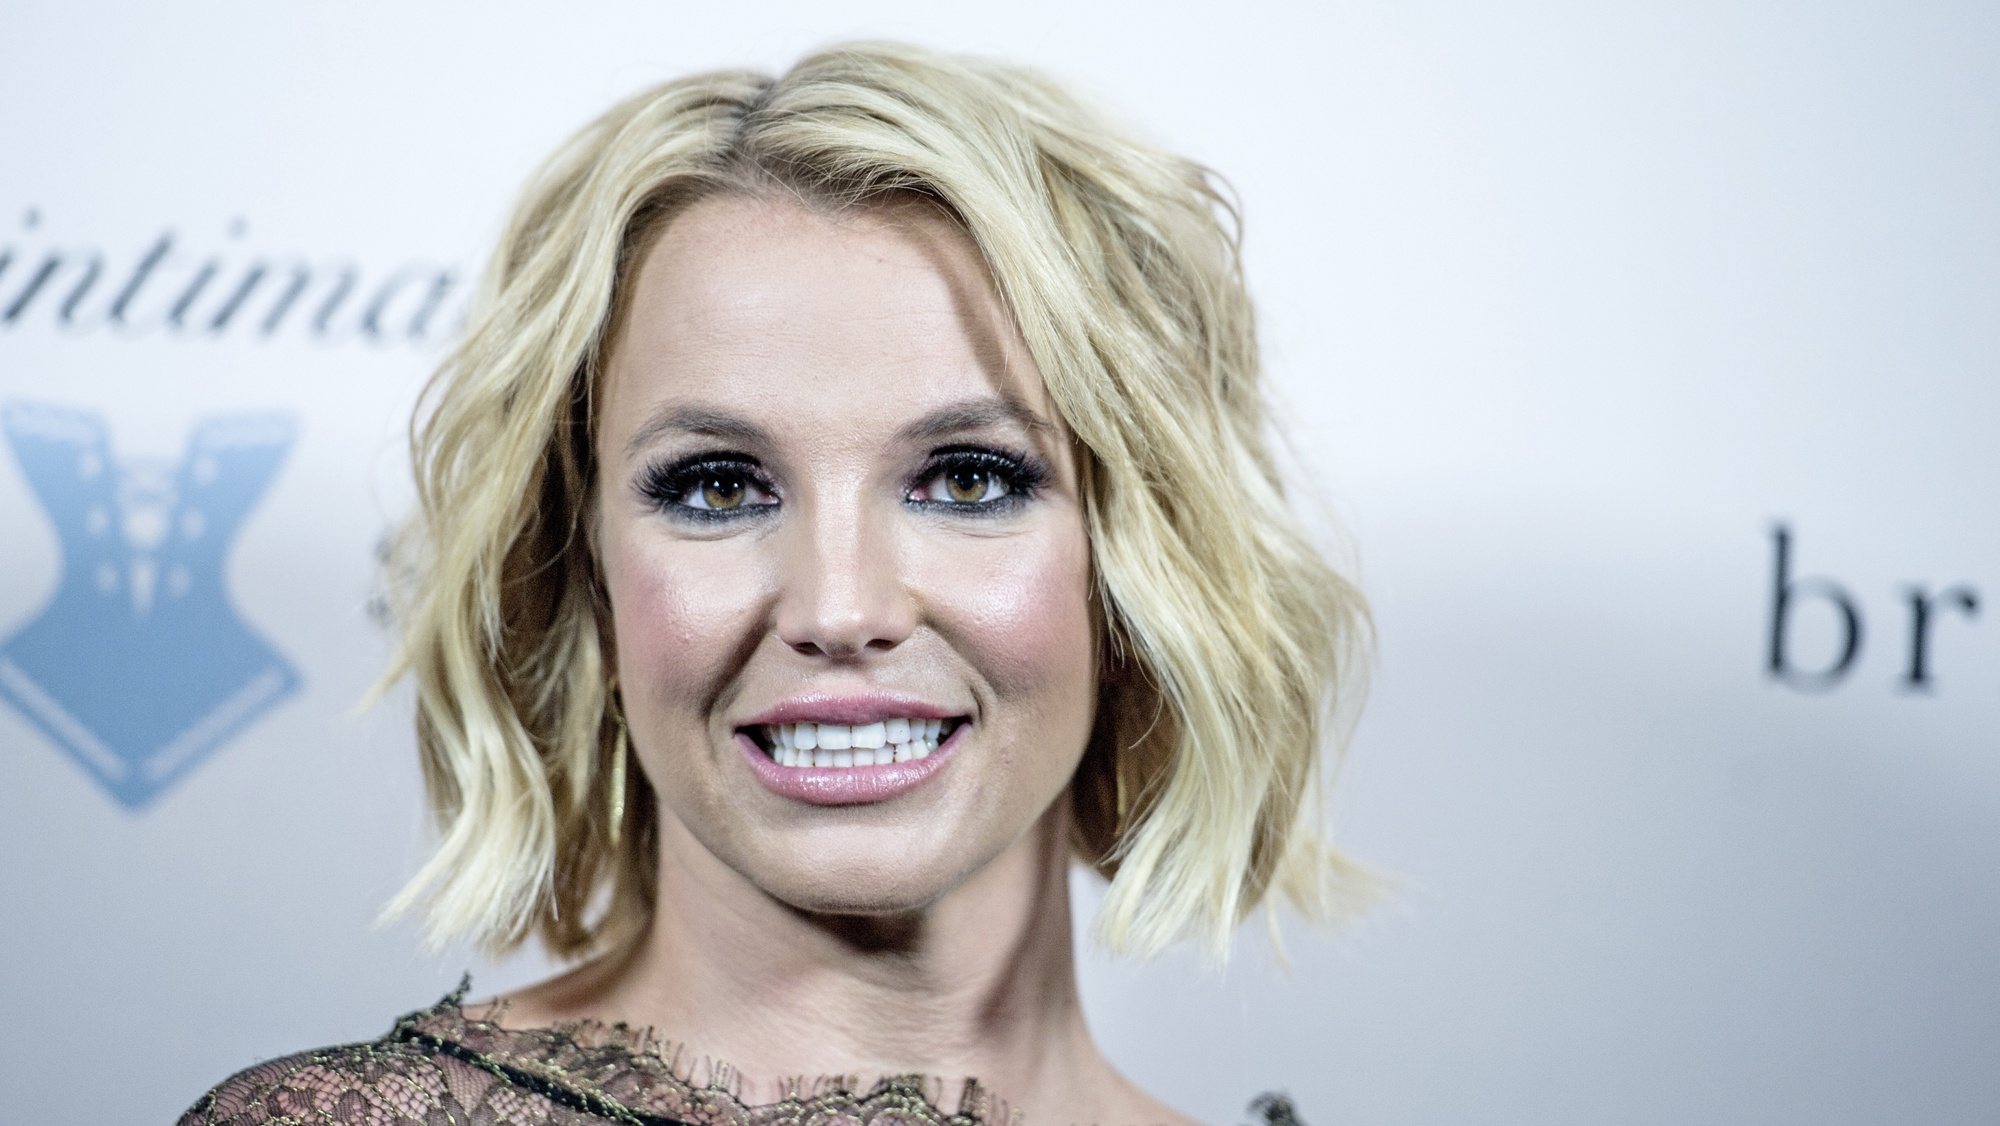 epa08398618 (FILE) - US singer Britney Spears smiles during the launch of her new lingerie brand &#039;The Intimate Britney Spears&#039; with an event at the Forum in Copenhagen, Denmark, 25 September 2014 (reissued 03 May 2020). Reports from 02 May 2020 state that a judge in California extended the conservatorship on Spears until end of August 2020. The reports on an order authorising Britney&#039;s temporary conservator&#039;s extended term come only few days after Spears accidentally set her gym on fire.  EPA/CHRISTIAN LILIENDAHL  DENMARK OUT *** Local Caption *** 51587619